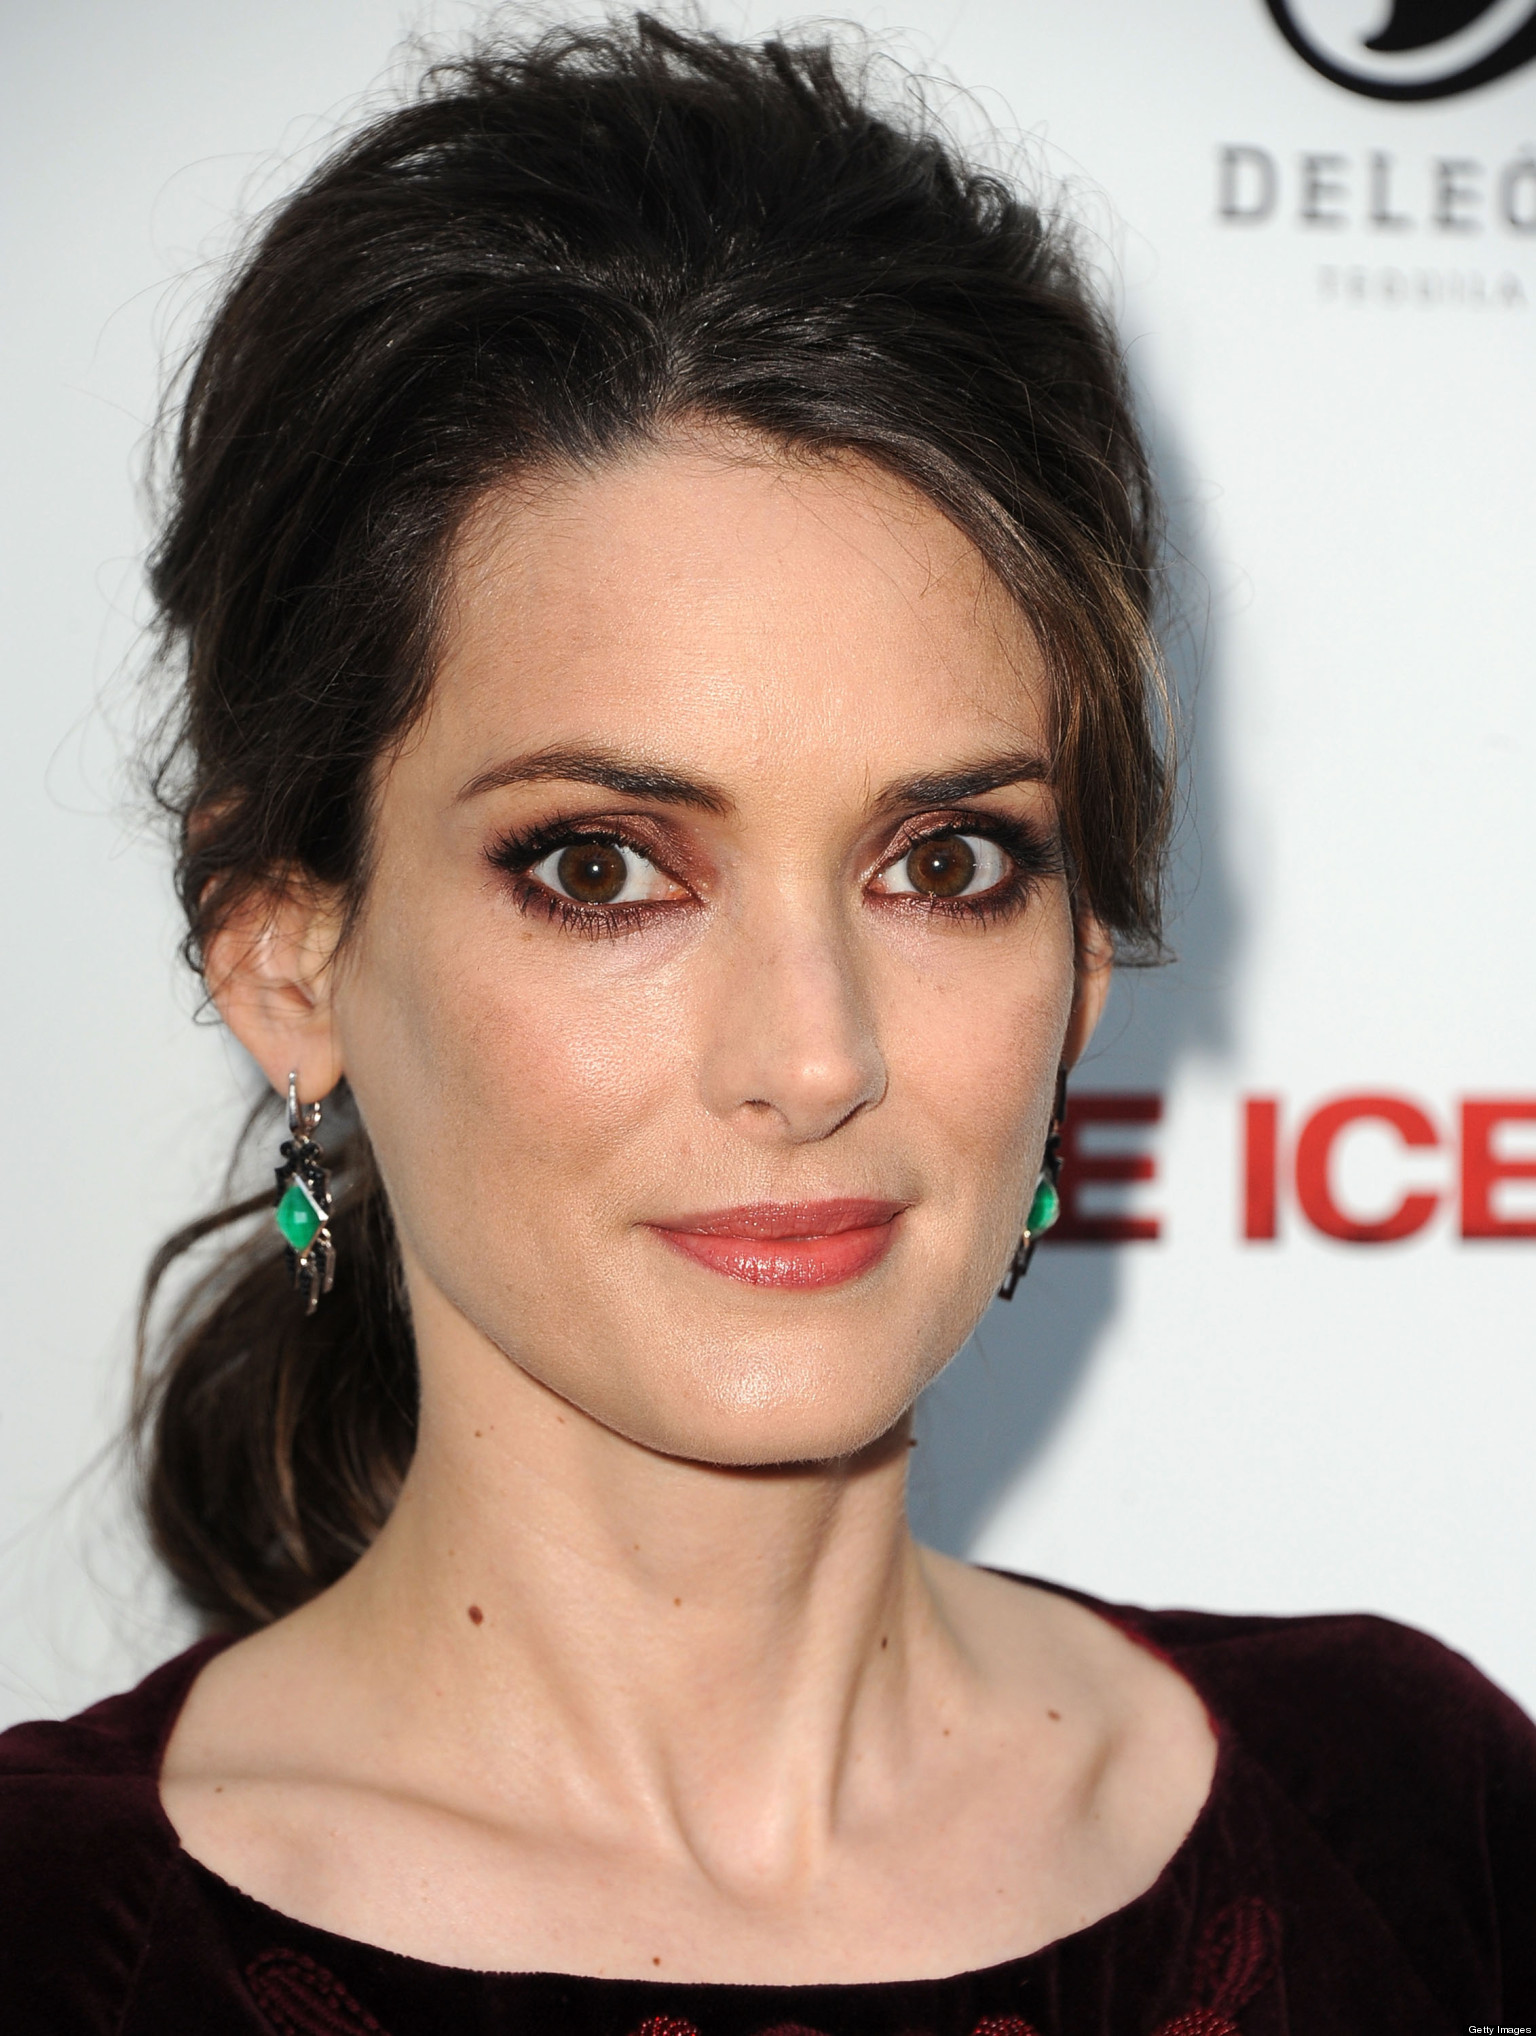 HOLLYWOOD, CA - APRIL 22:  Winona Ryder arrives at the "The Iceman"  - Los Angeles Premiere on April 22, 2013 in Hollywood, California.  (Photo by Steve Granitz/WireImage)